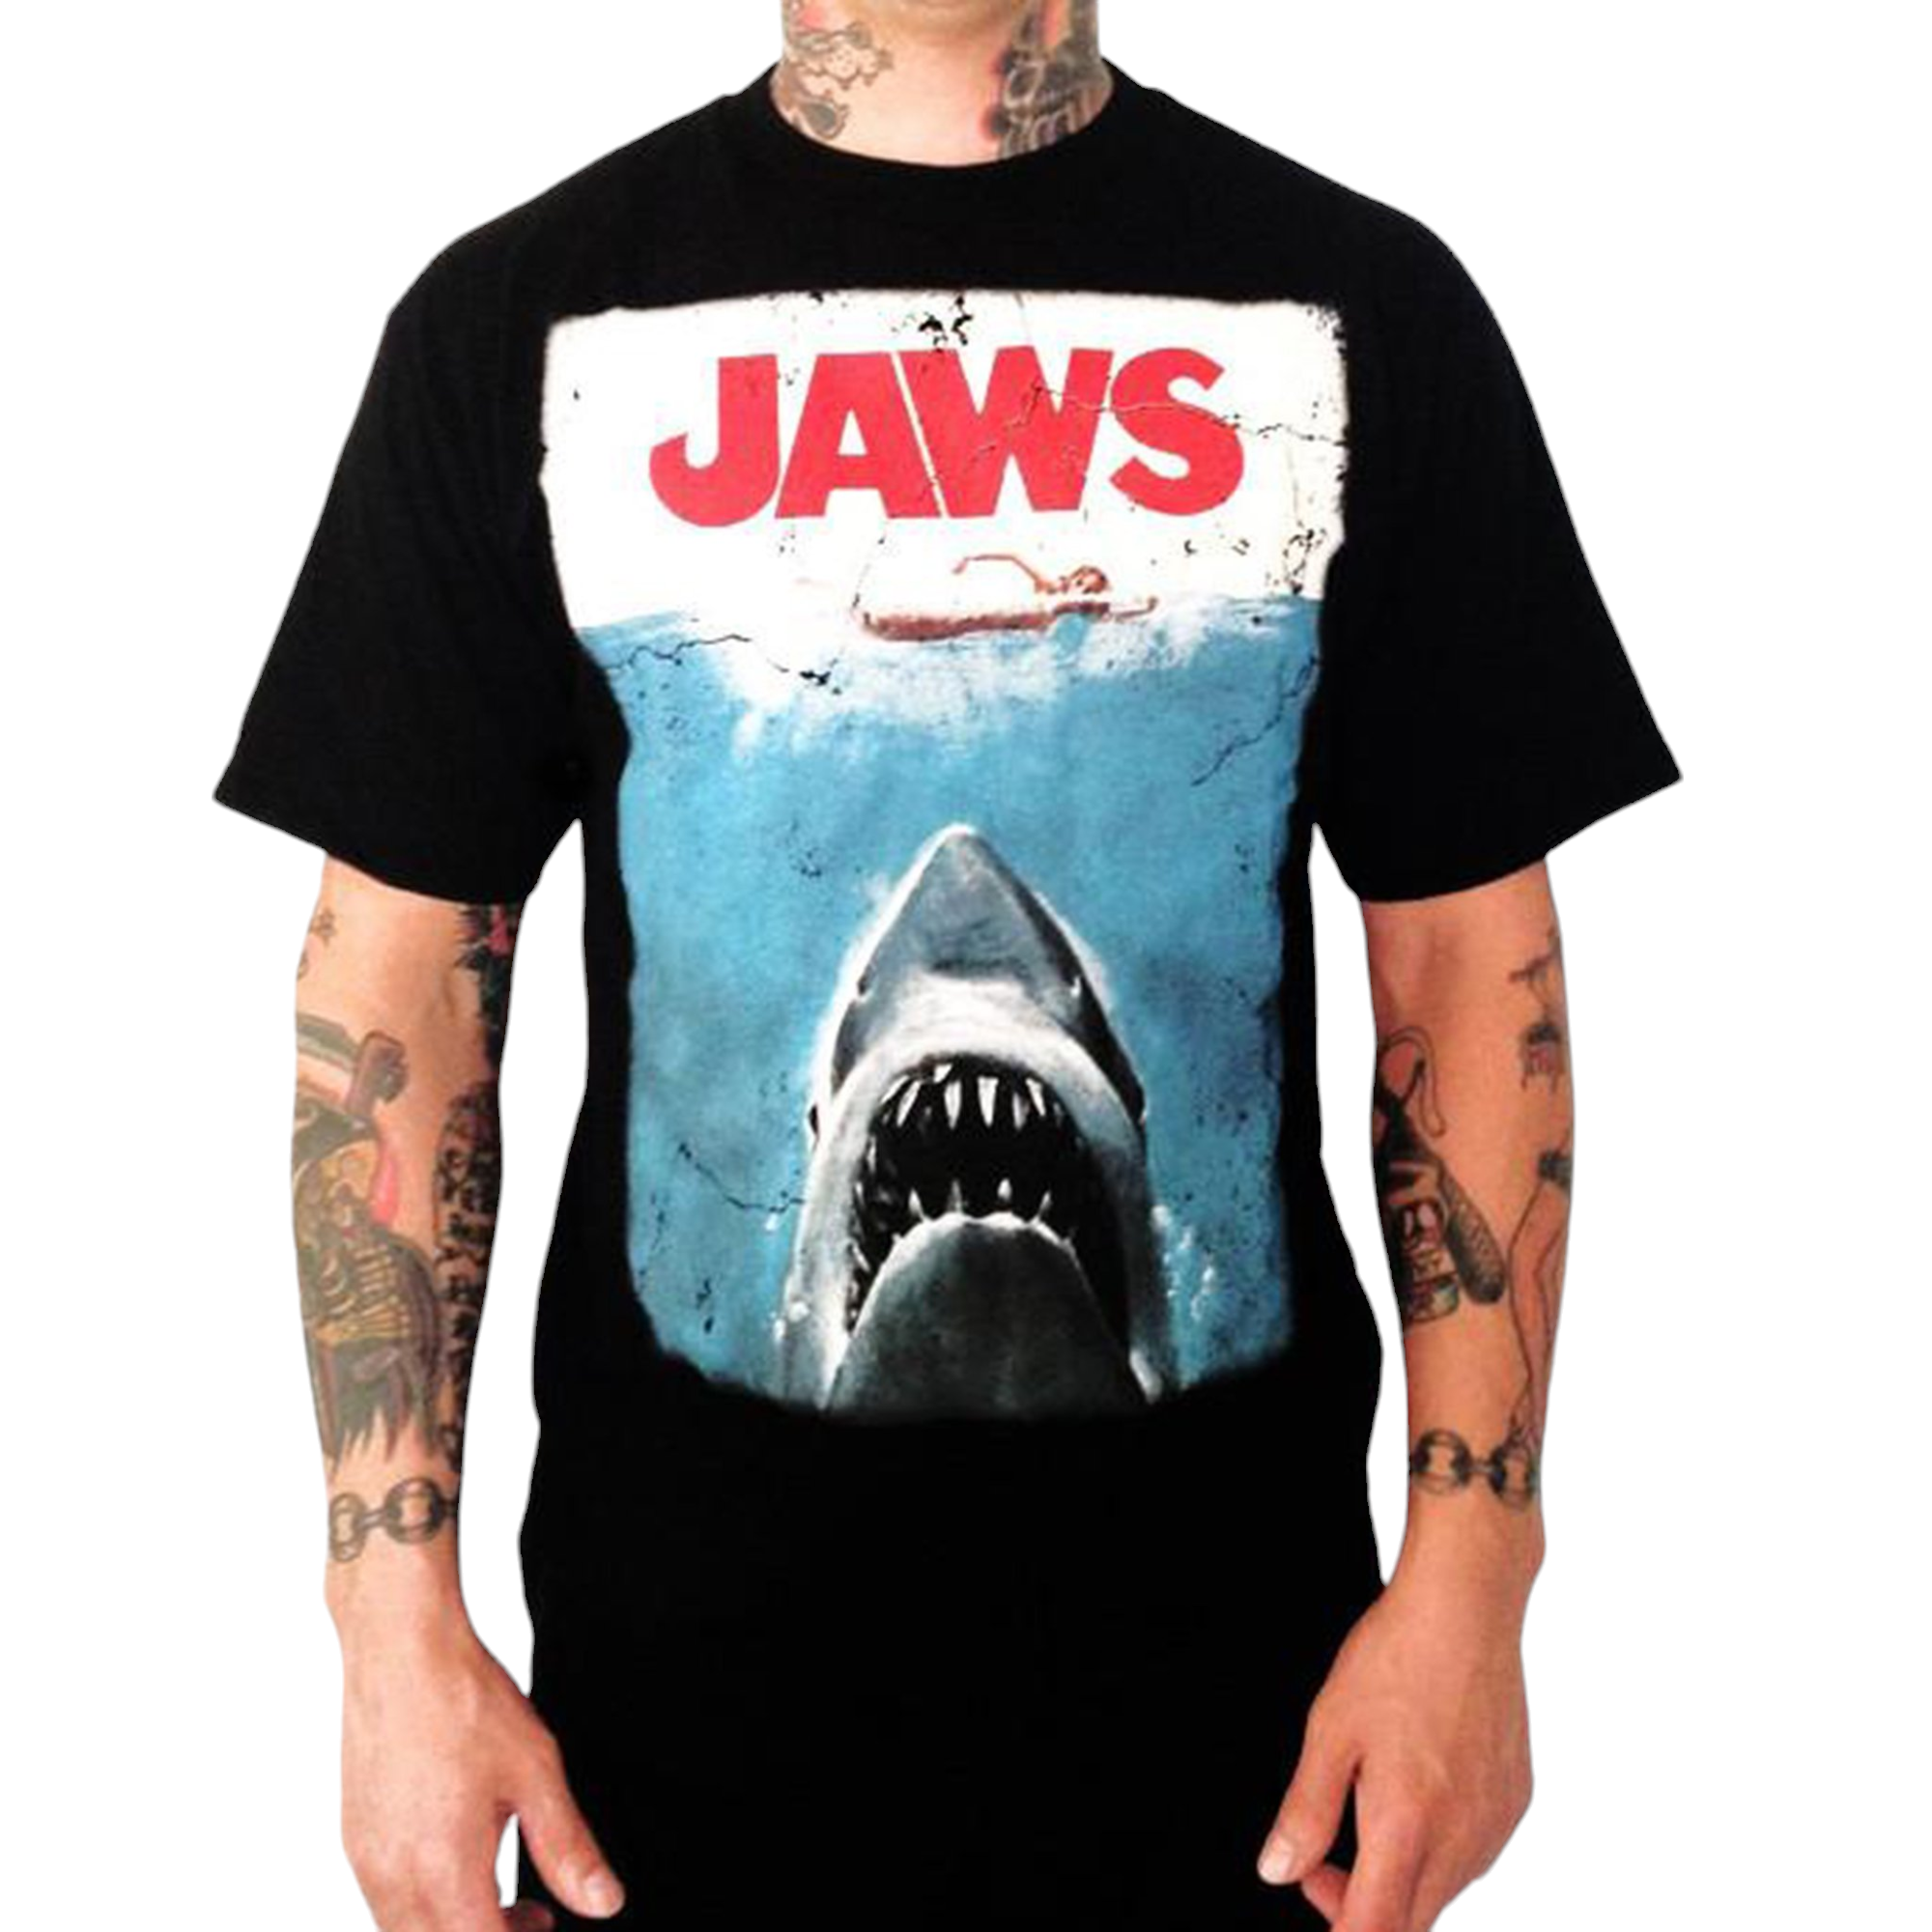 Official Jaws Tee representing our Jaws merch category